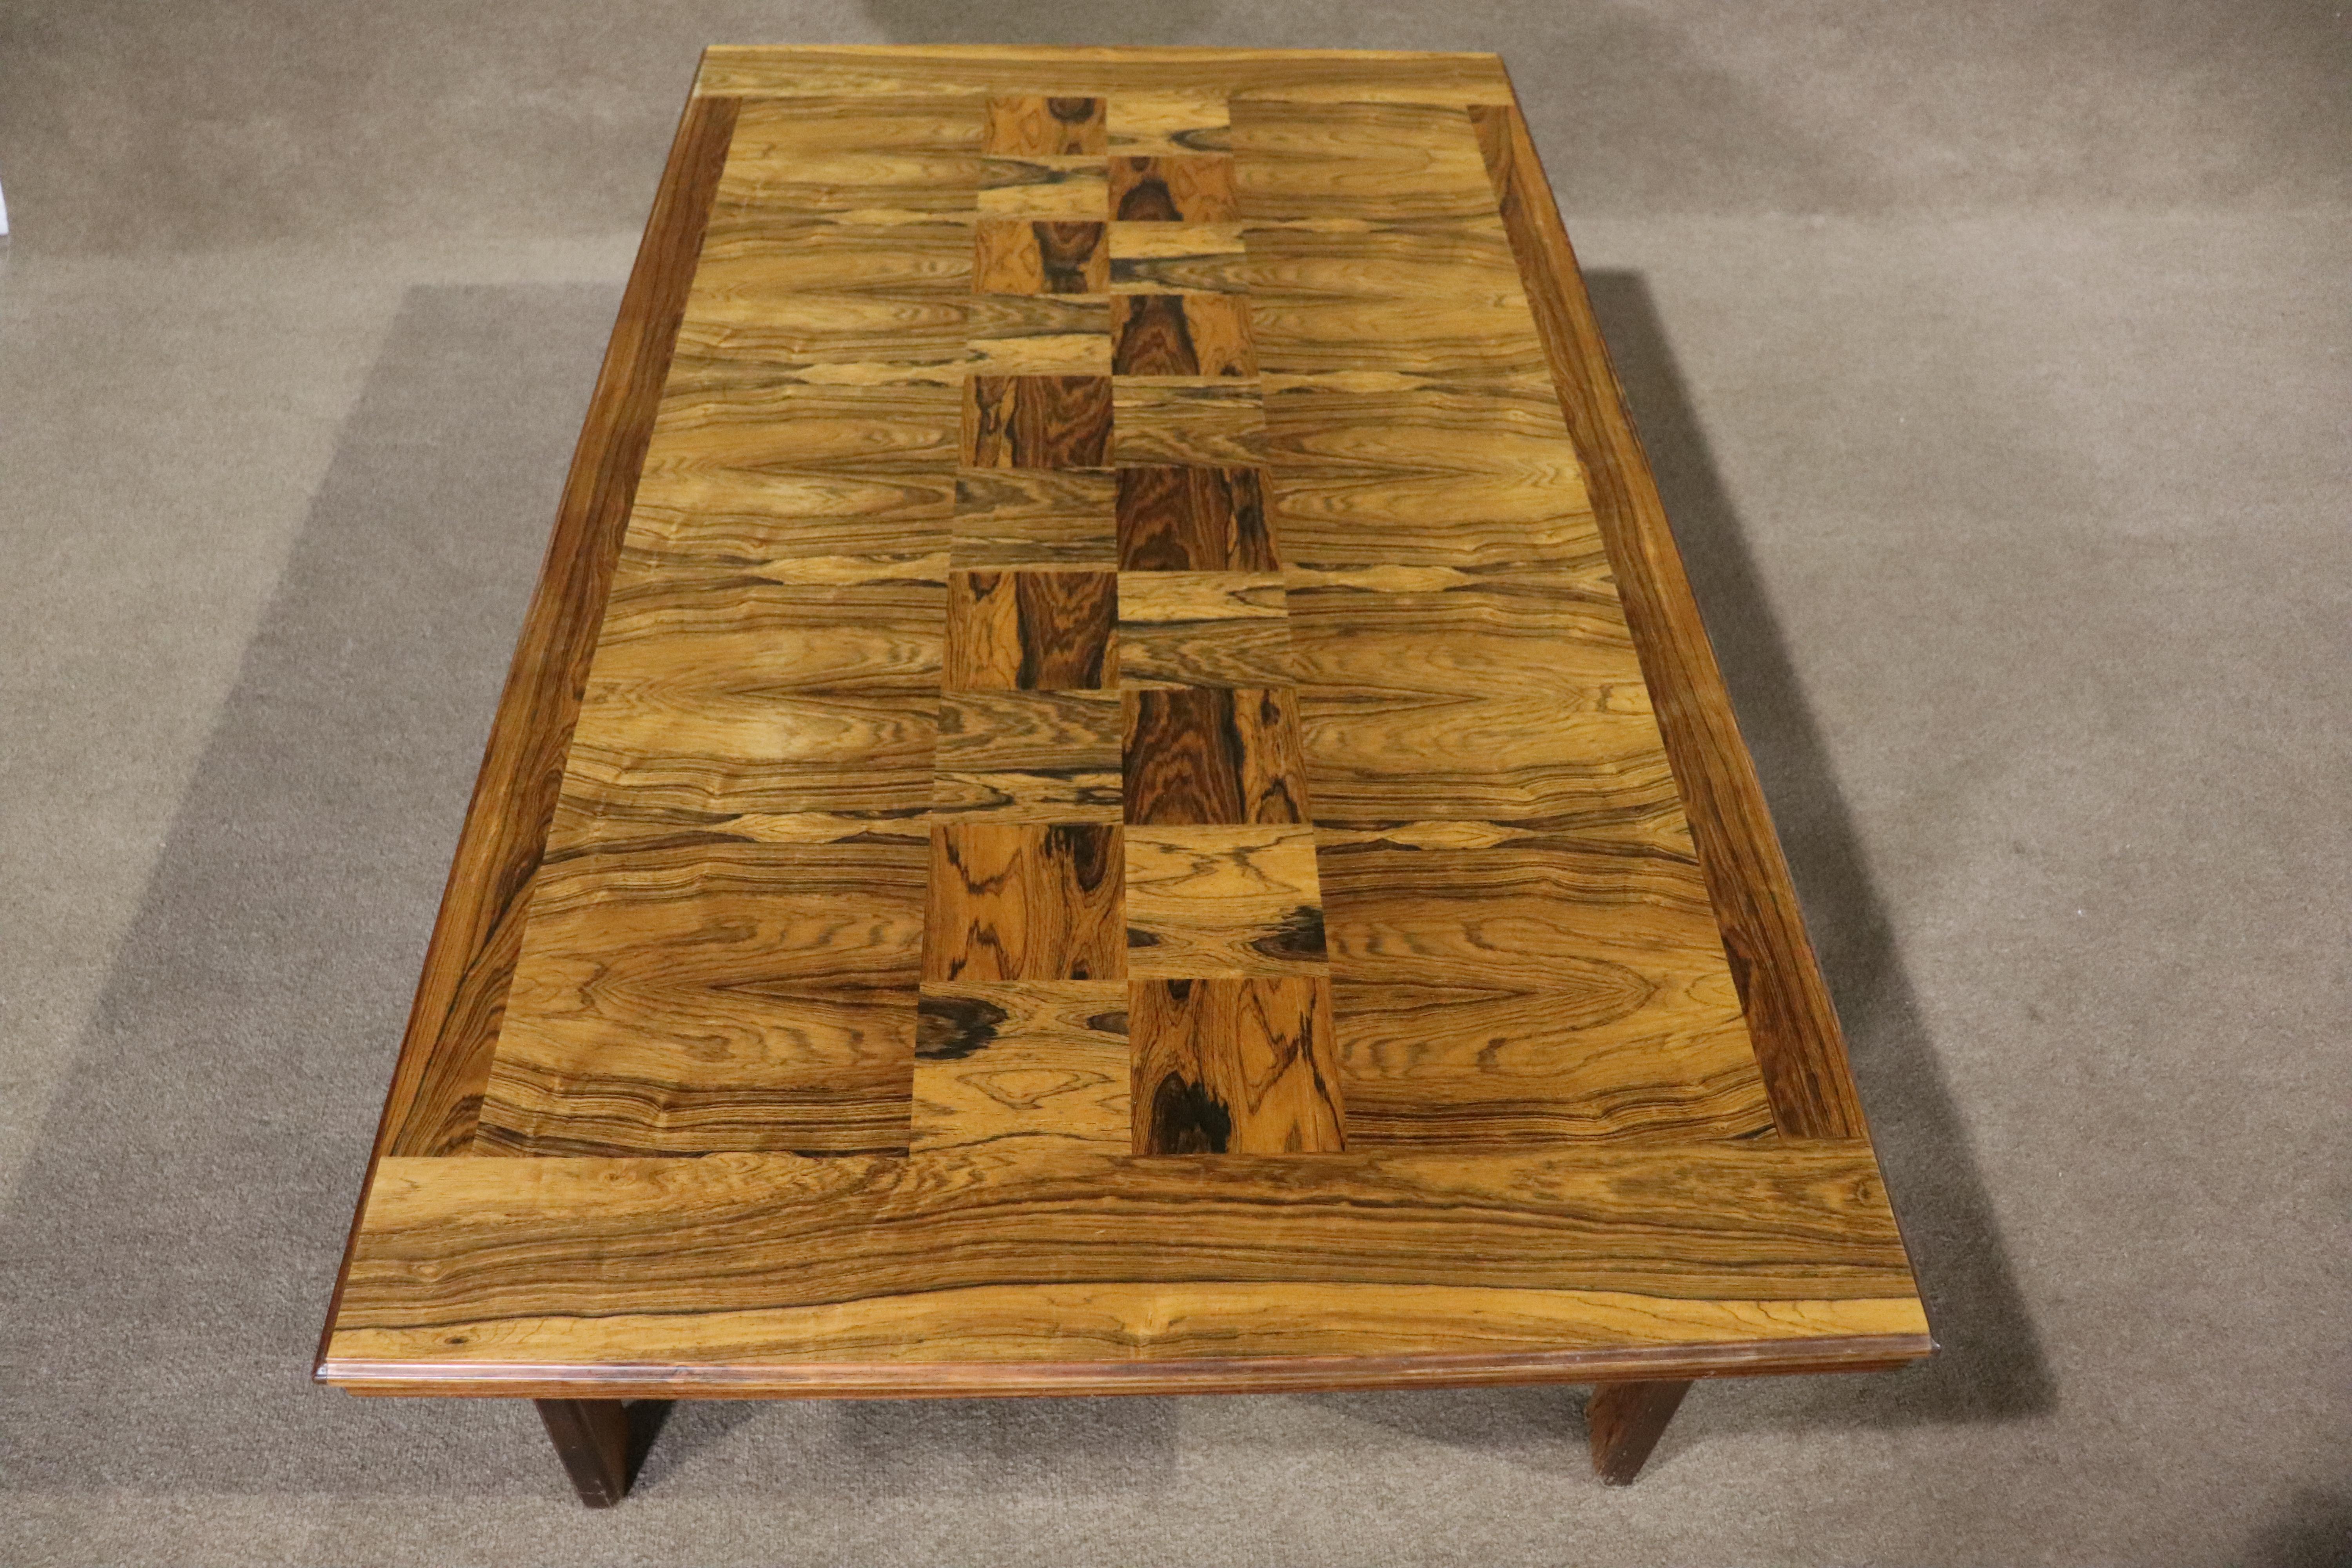 Mid-century modern coffee table with rich rosewood veneer patterns. This table is a beautiful focal point of your living room.
Please confirm location NY or NJ